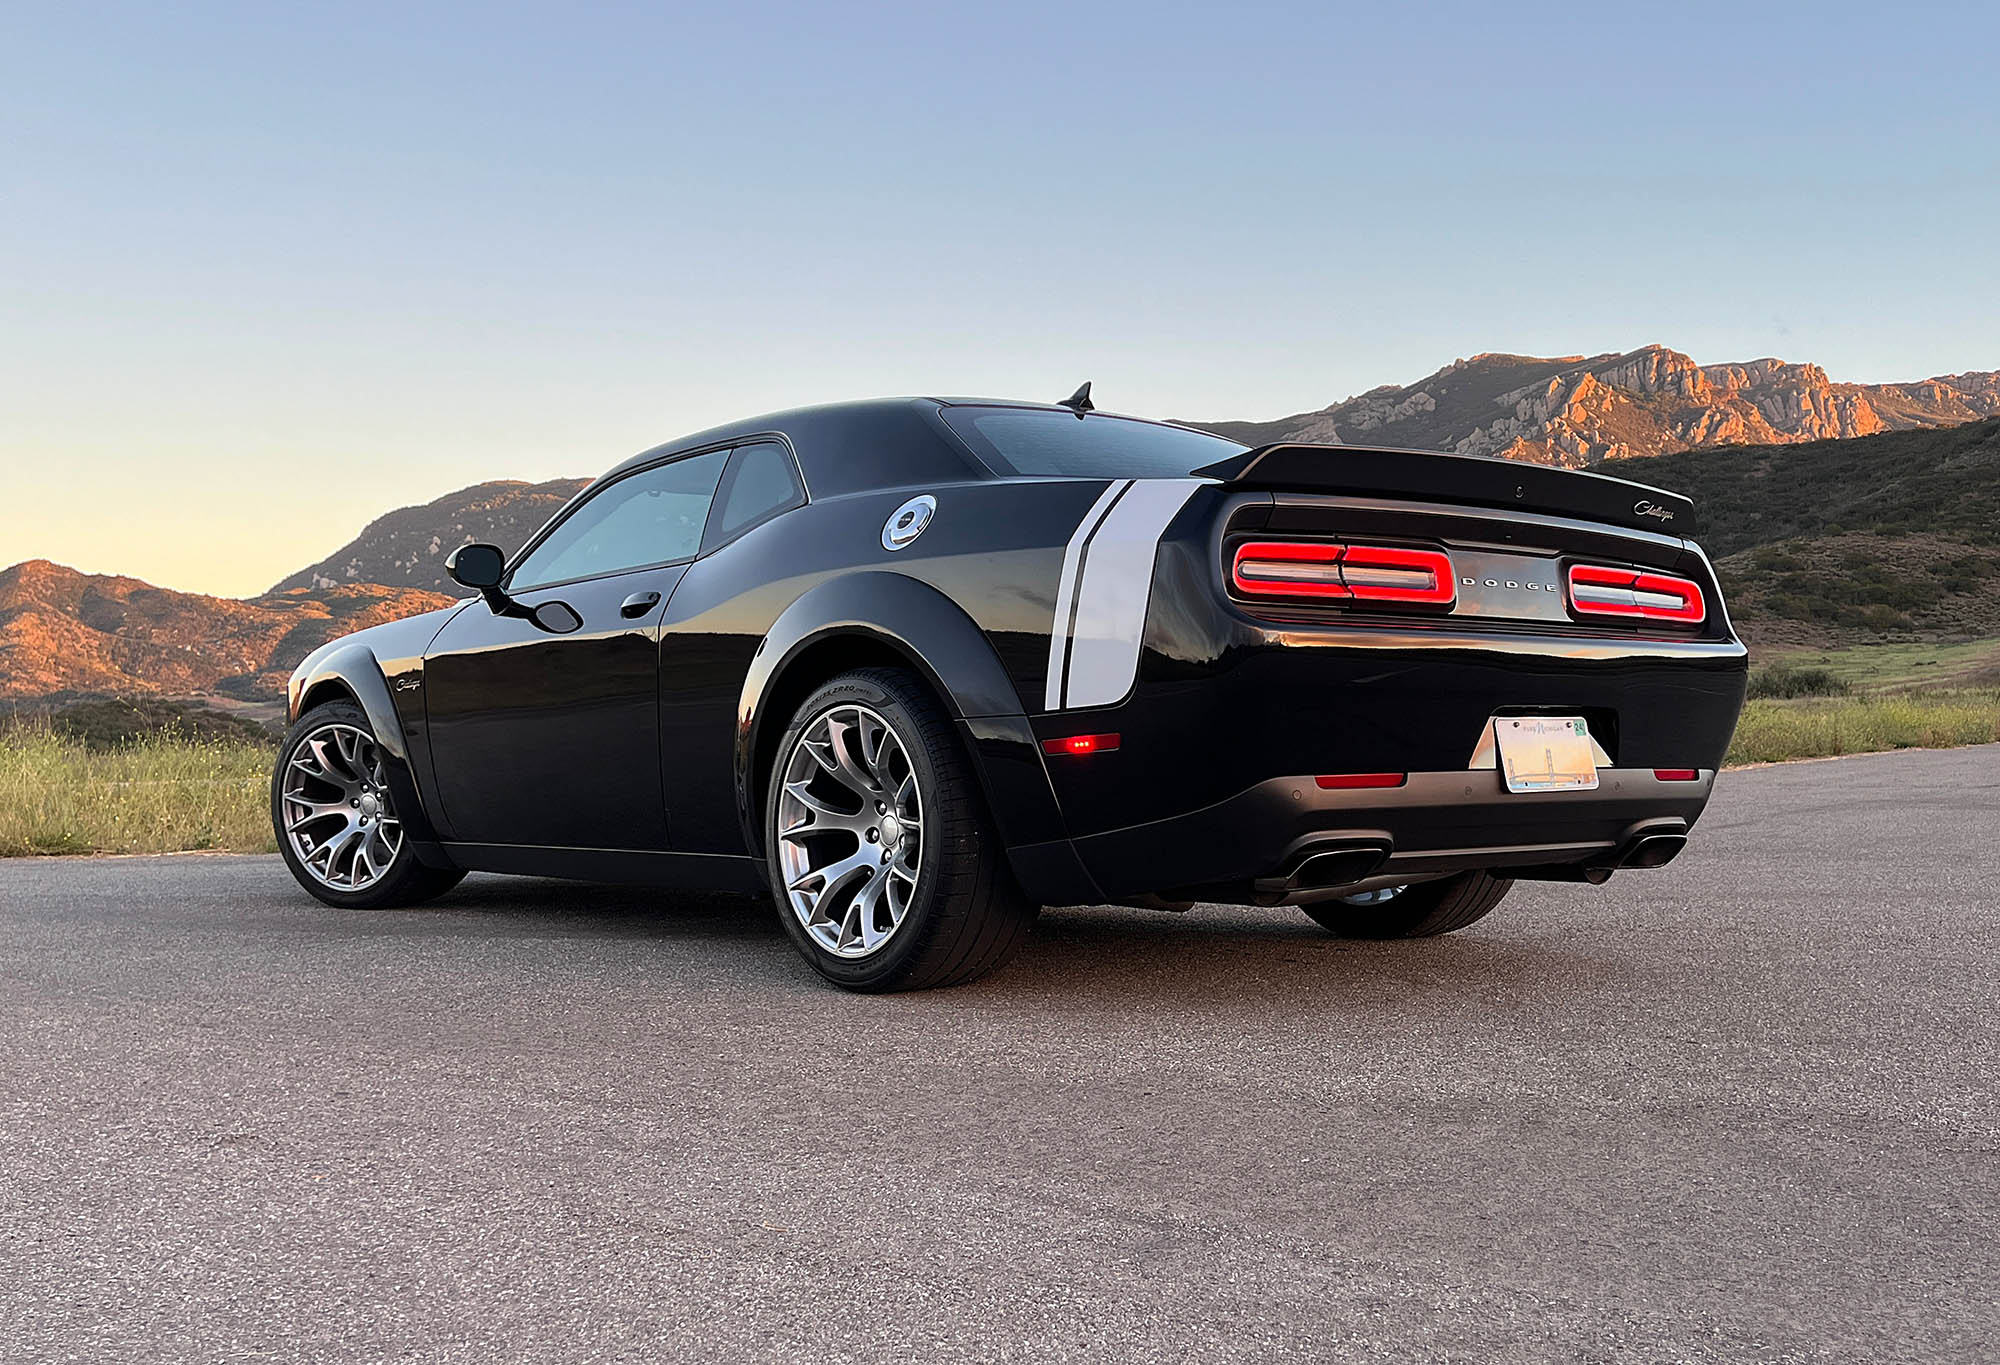 2023 Dodge Challenger Black Ghost rear three-quarter view with mountains in the background.